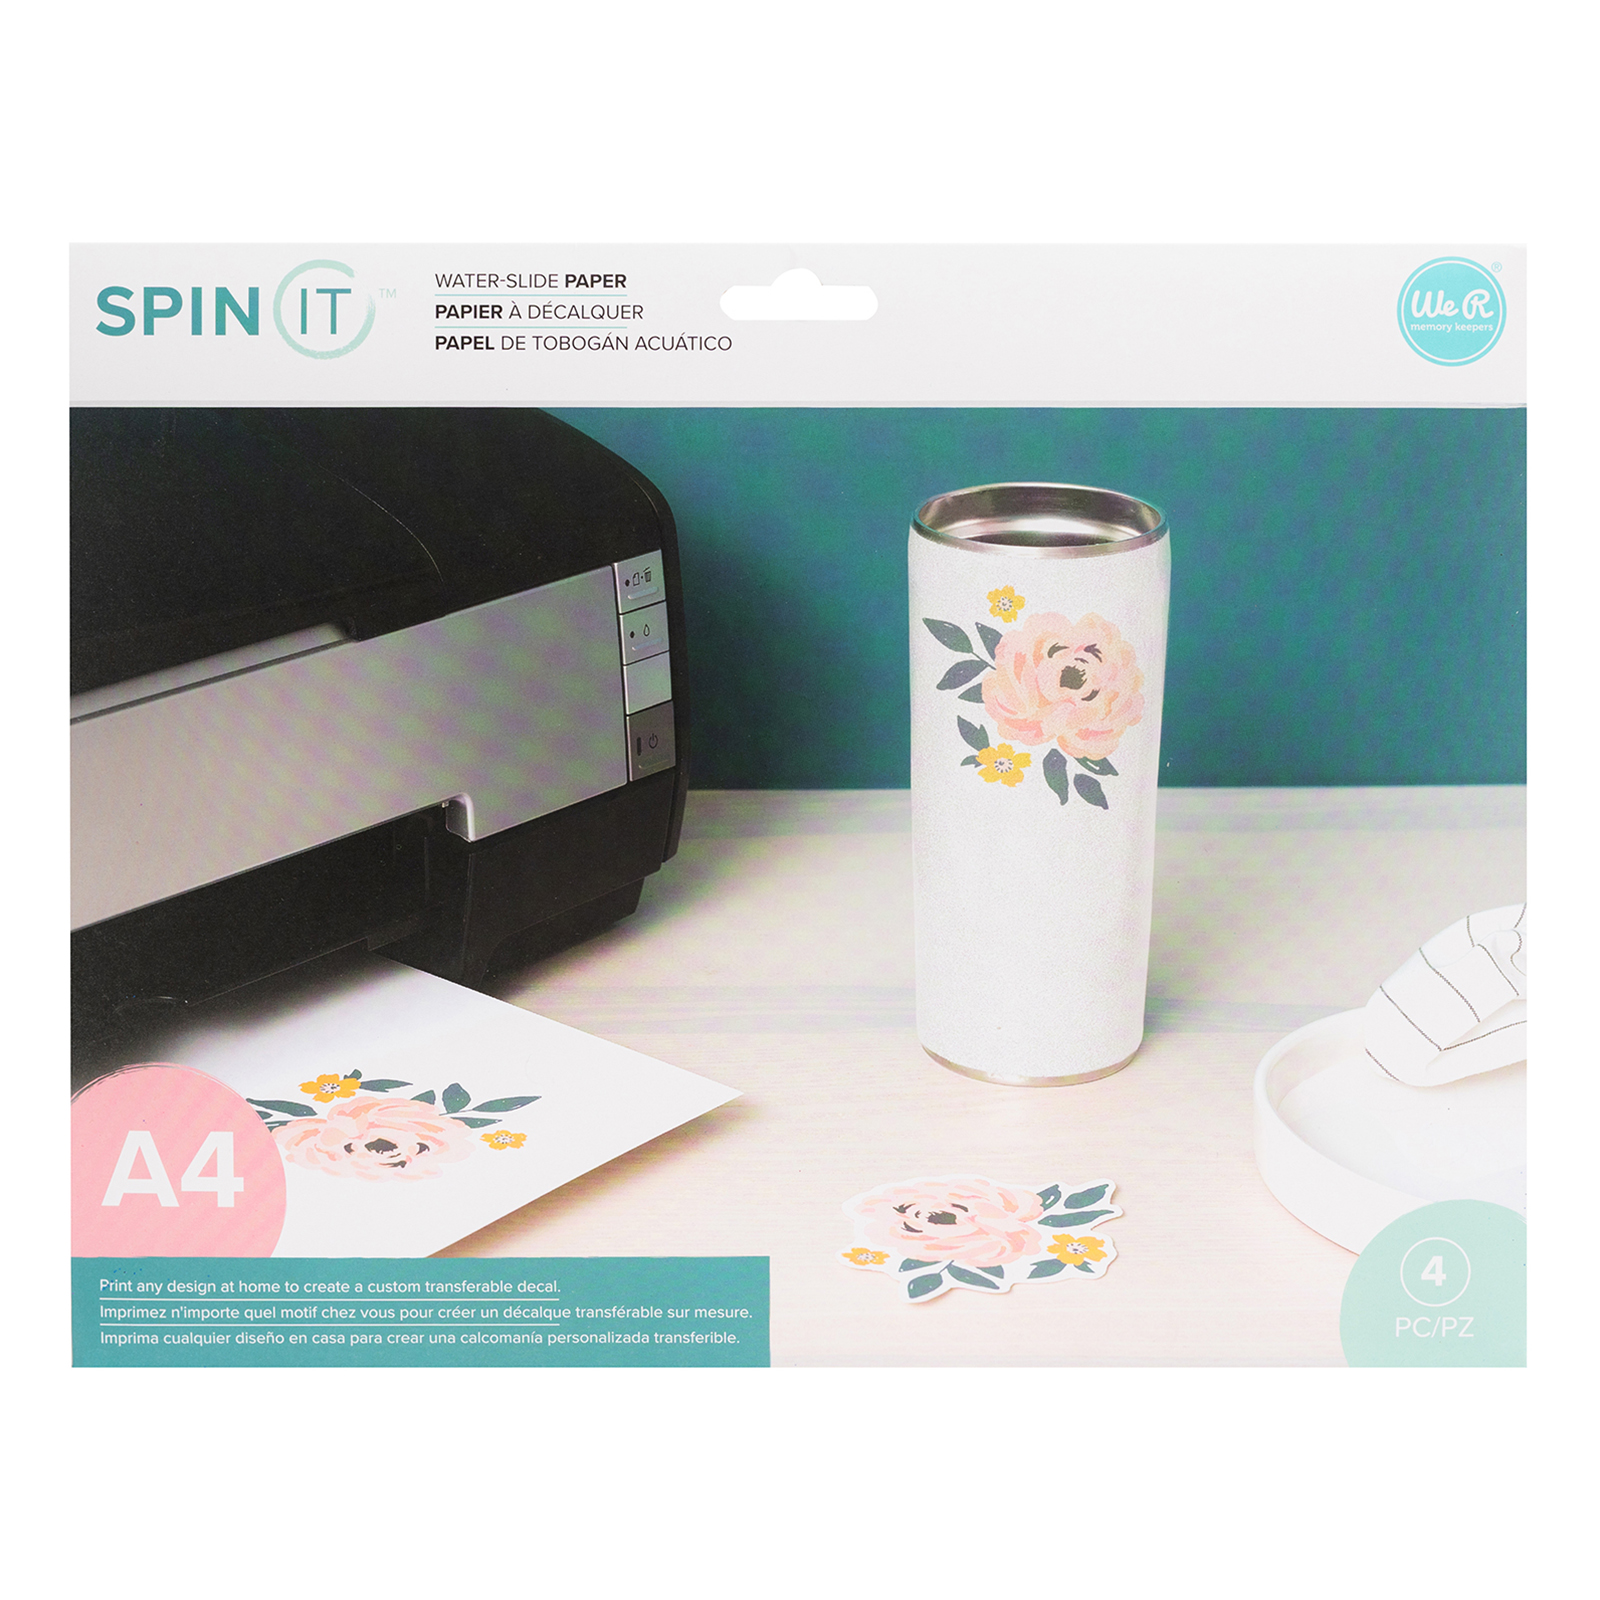 We R Makers • Spin IT water-slide paper